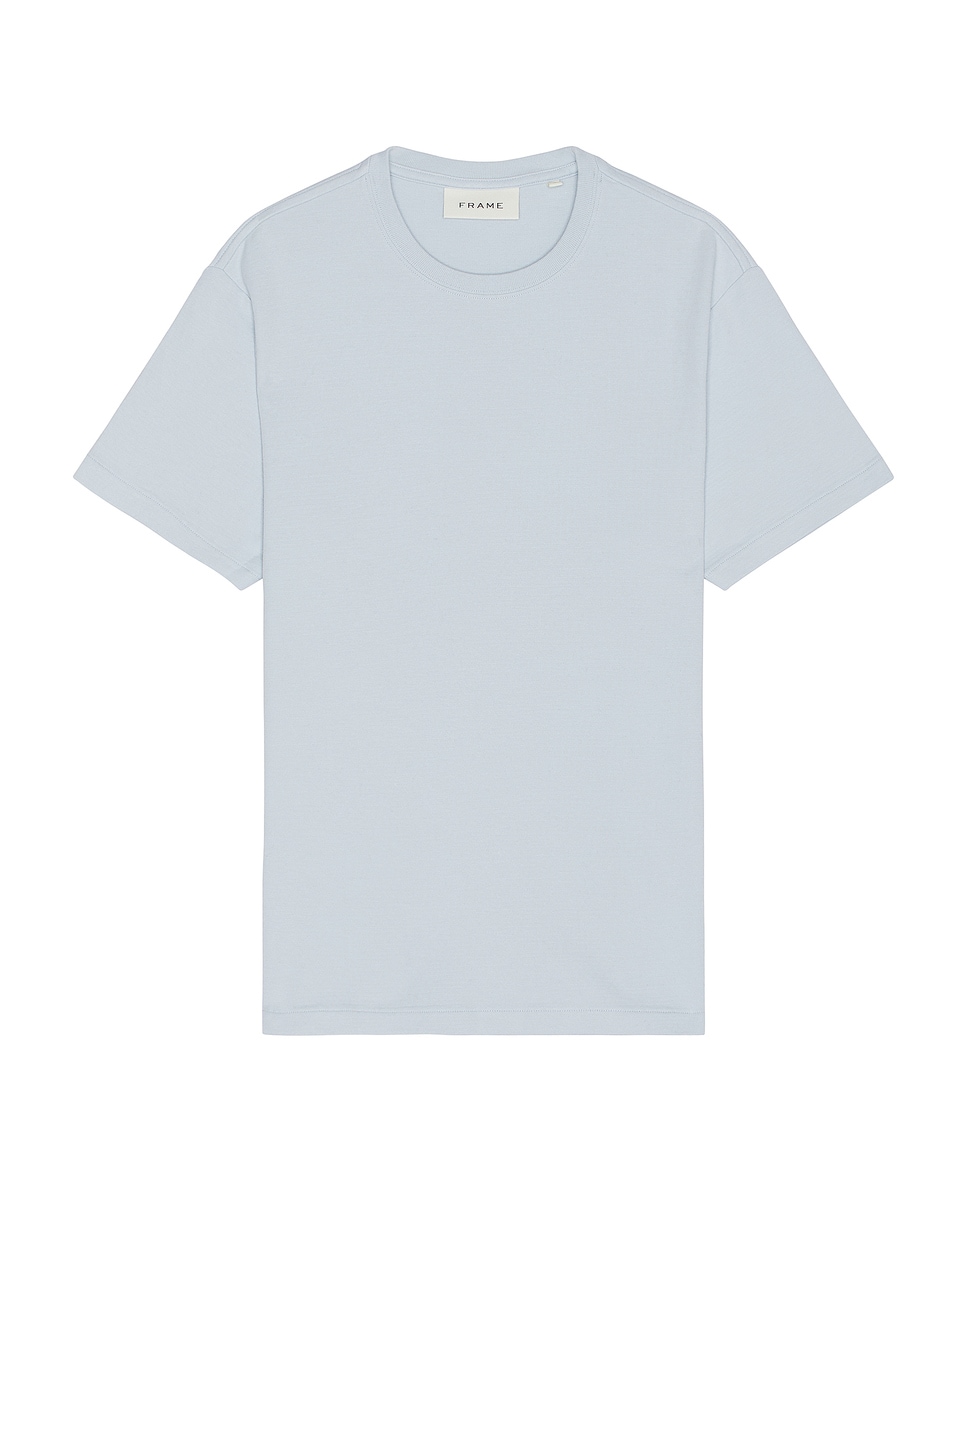 Image 1 of FRAME Duo Fold Tee in Ballad Blue